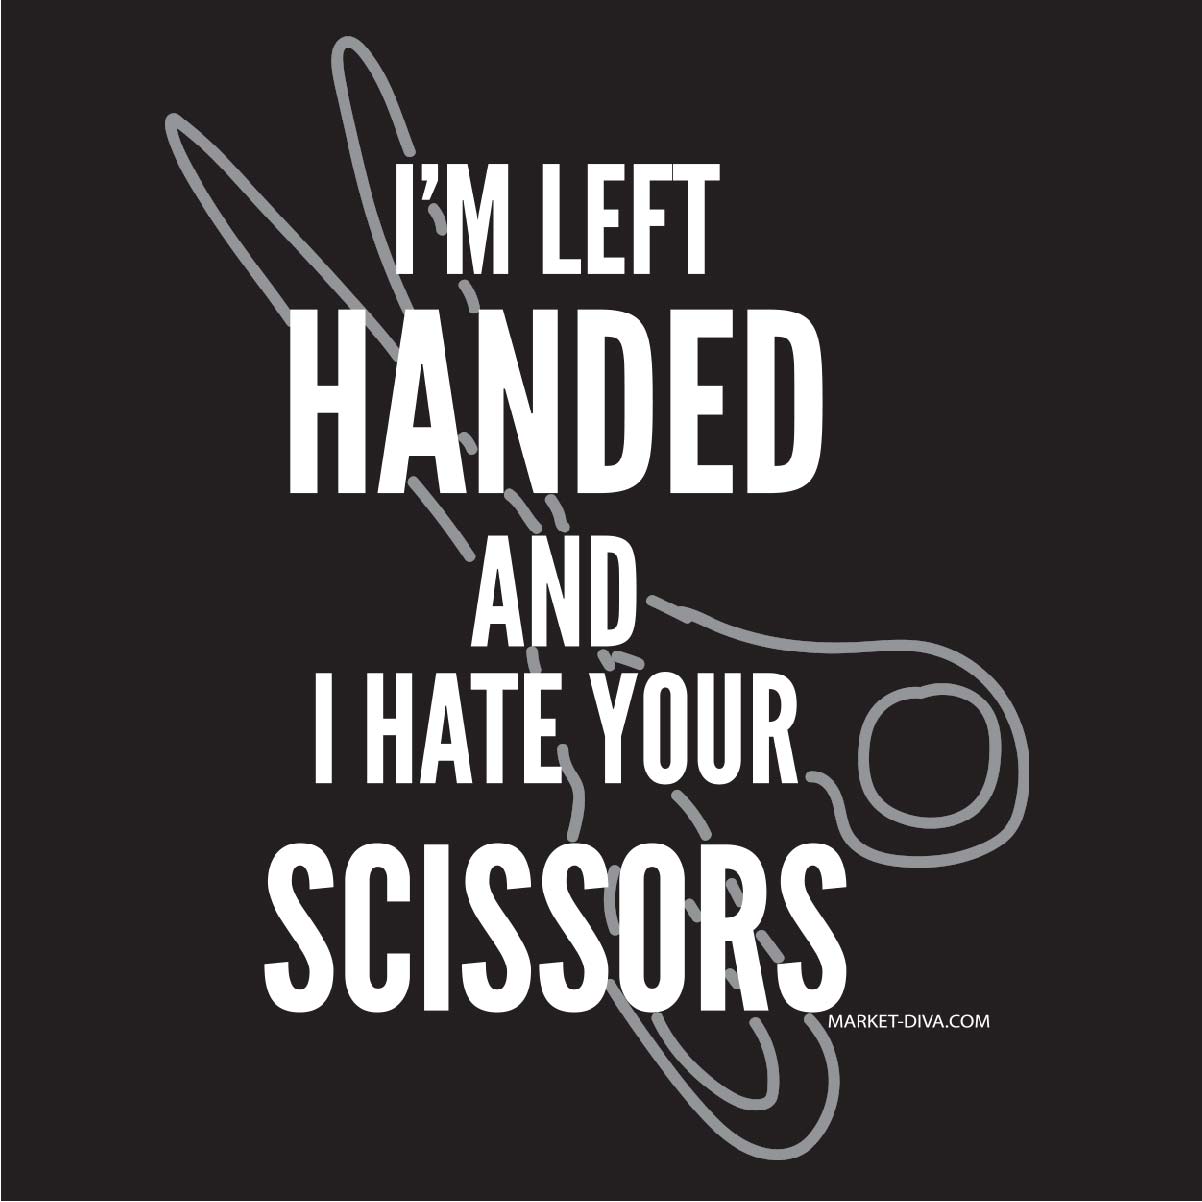 Left Handed and I Hate Your Scissors